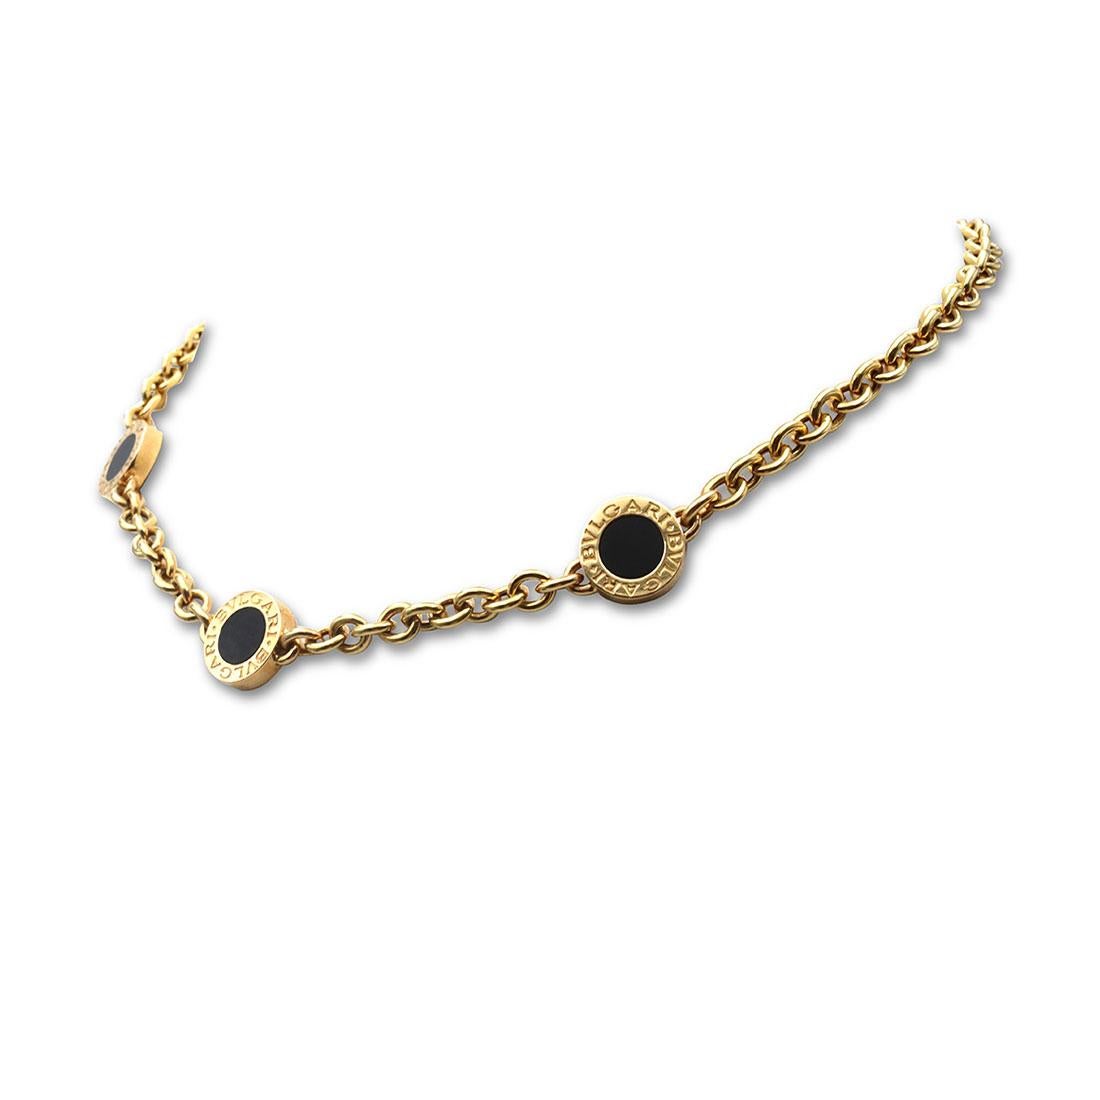 Authentic Bvlgari station necklace from the Bvlgari-Bvlgari collection crafted in 18 karat yellow gold. The cable link chain necklace features three round stations set with onyx. Signed Bvlgari, Made in Italy, 750 with hallmarks. The necklace is not